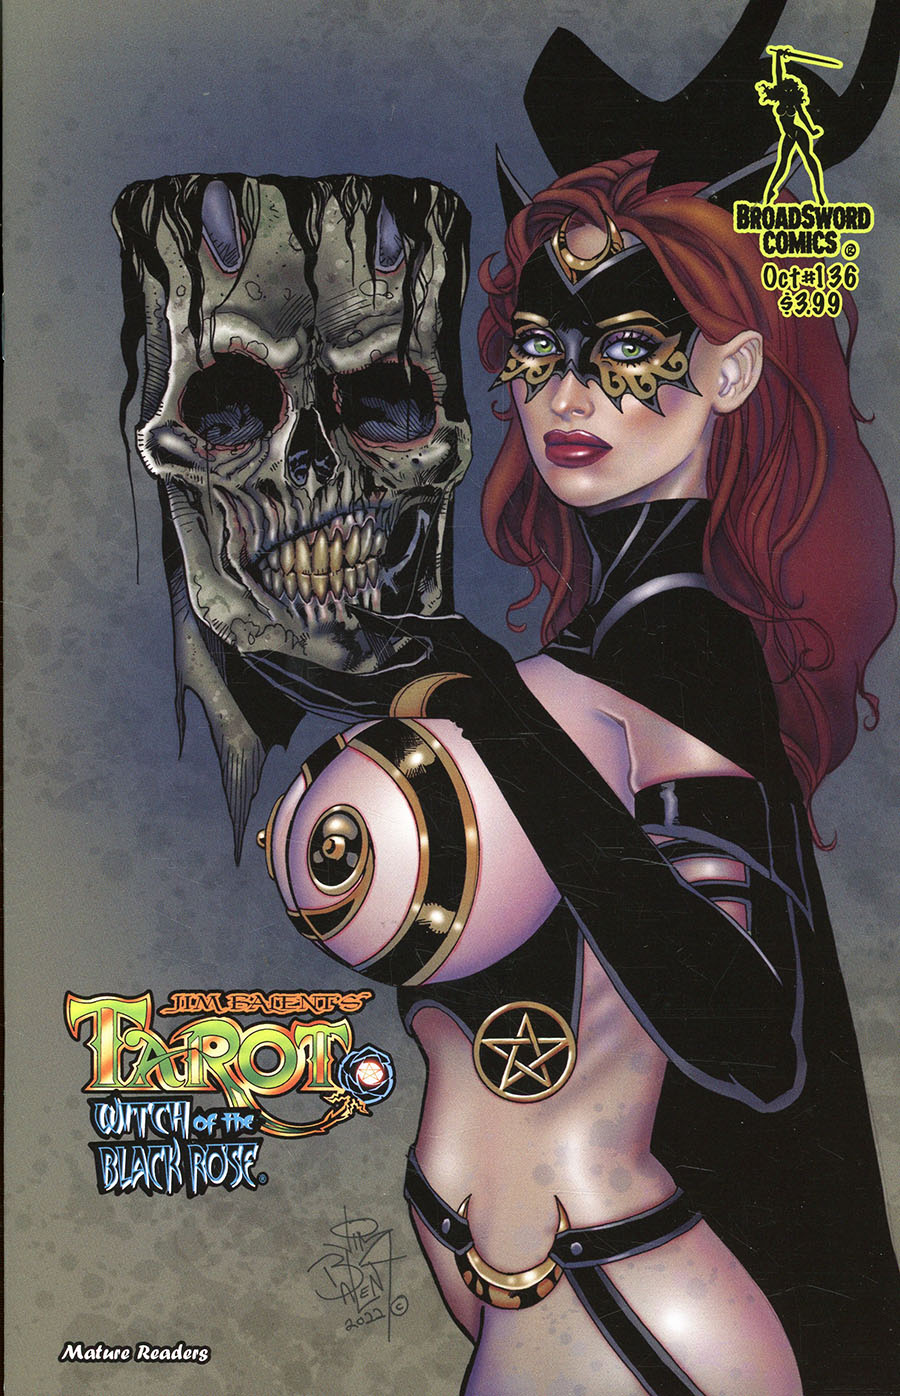 Tarot Witch Of The Black Rose #136 Cover A/B Regular Covers (Filled Randomly)